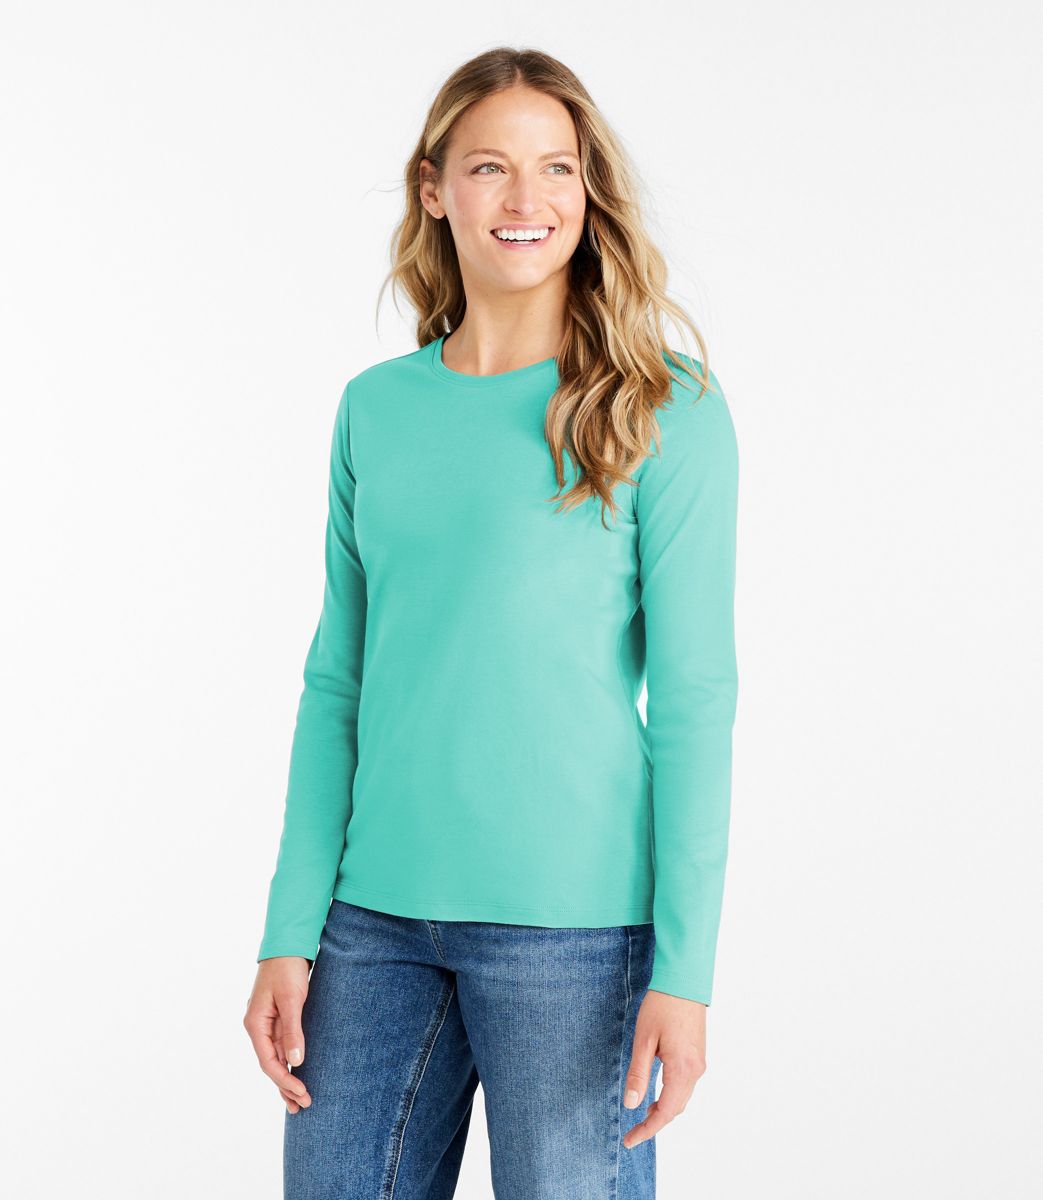 Scoop Women's Layered Tee with Long Sleeves, Sizes XS-XXL